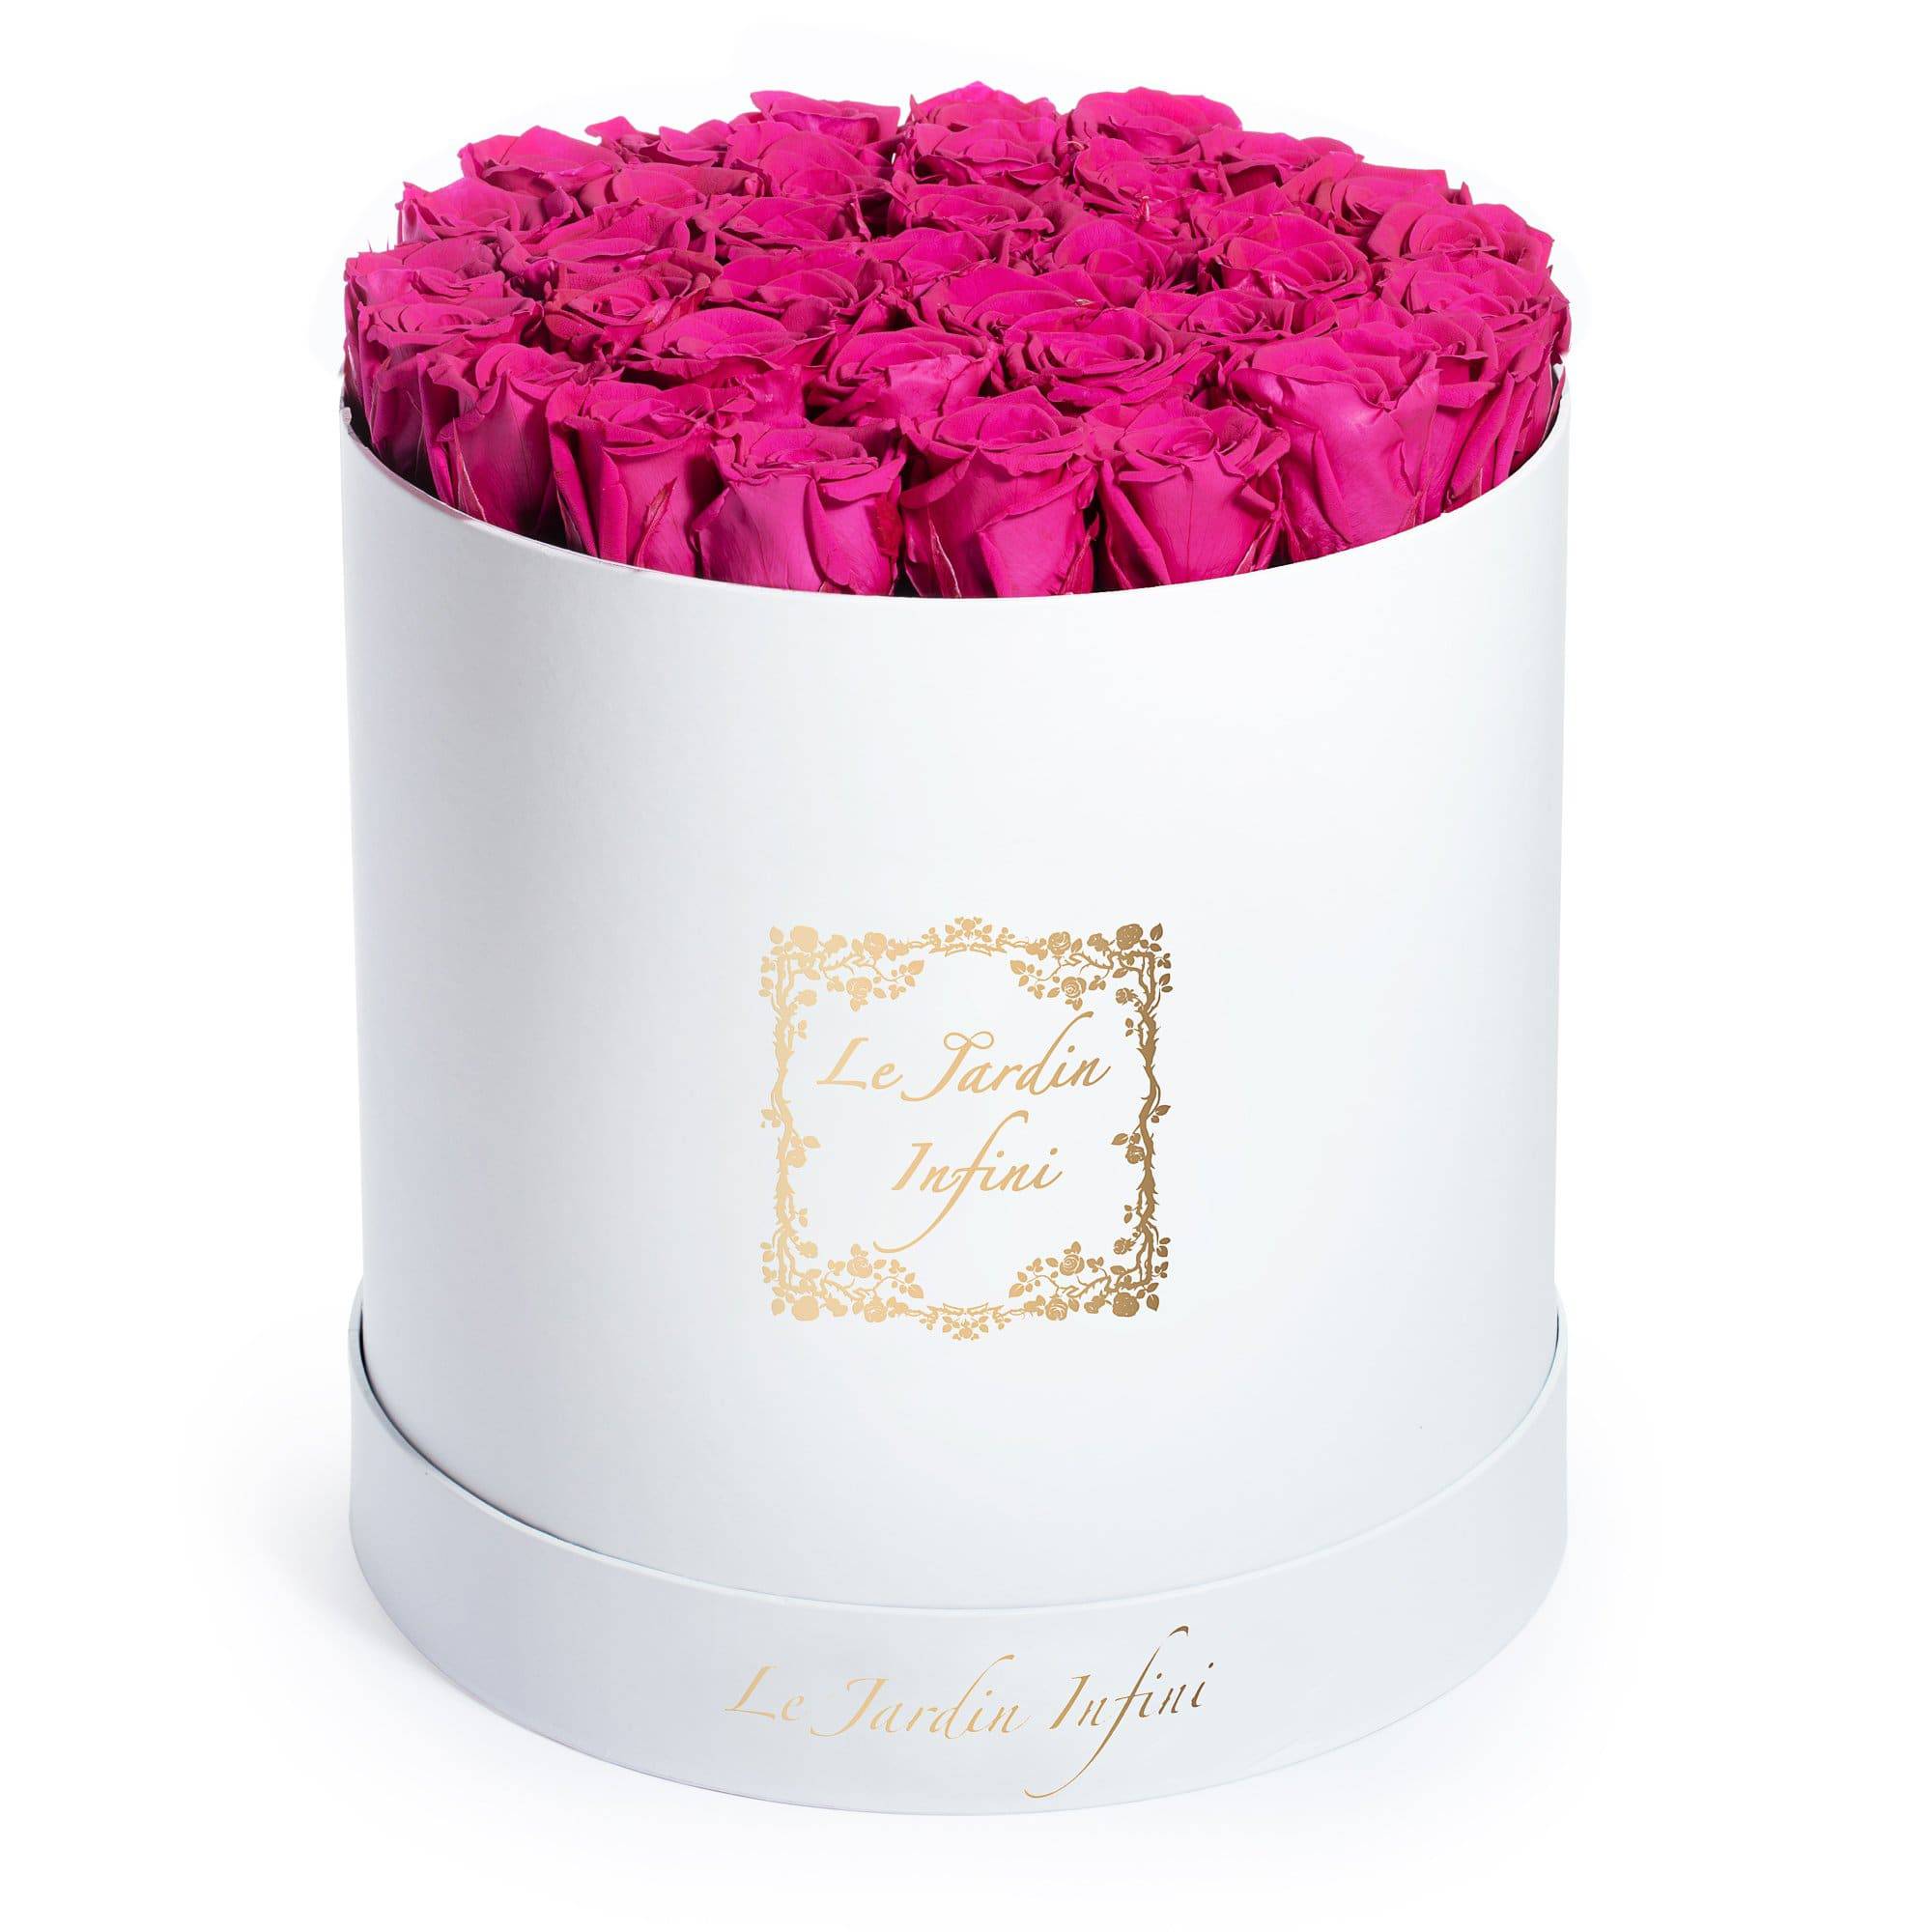 Hot Pink Preserved Roses - Large Round White Box - Le Jardin Infini Roses in a Box